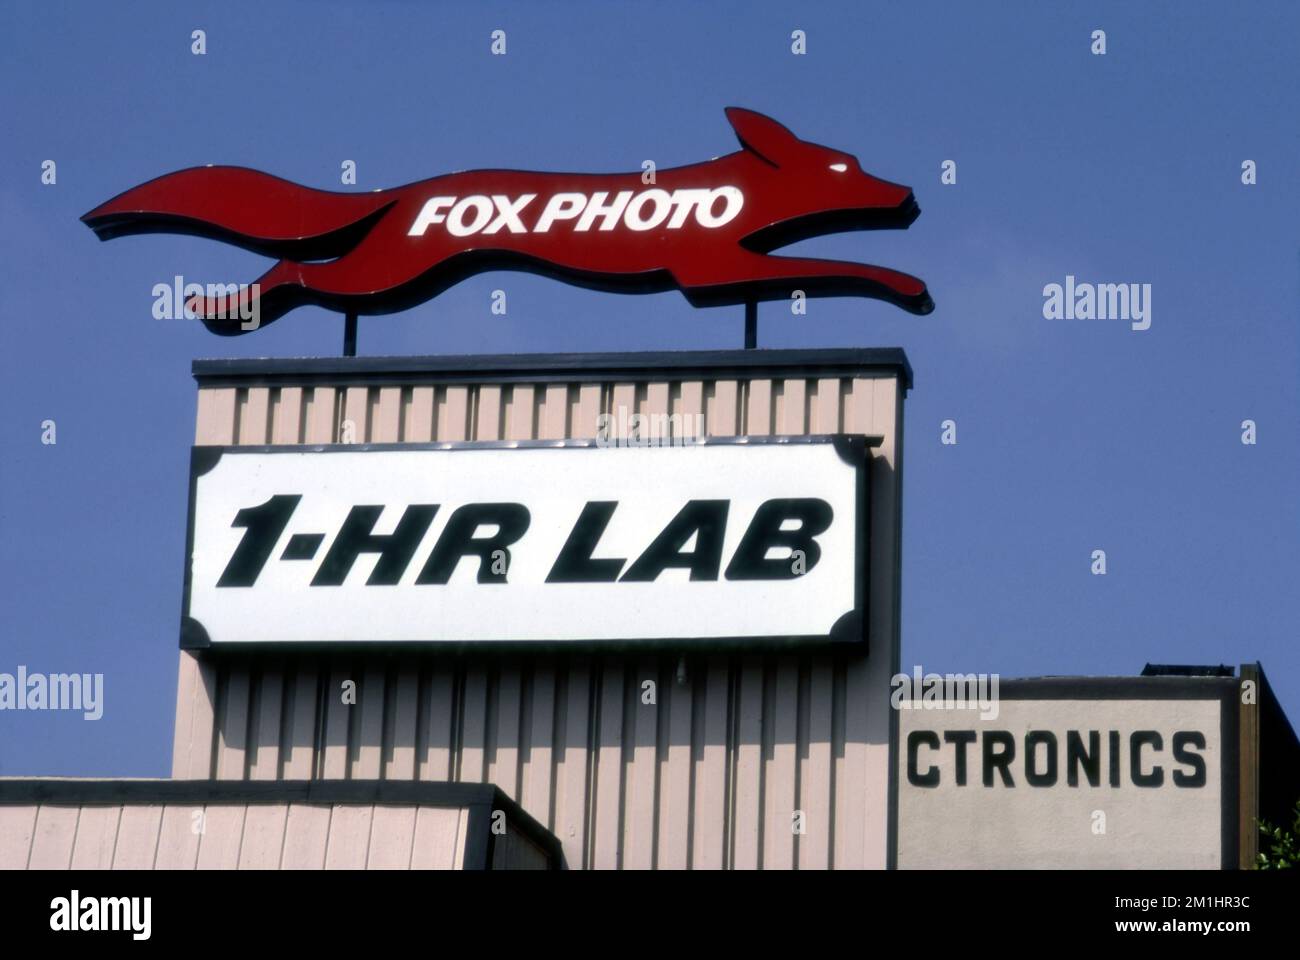 Sign for Fox Photo one hour photo developing from film on Pico Blvd. in West L.A., Los Angeles, CA 1985 Stock Photo